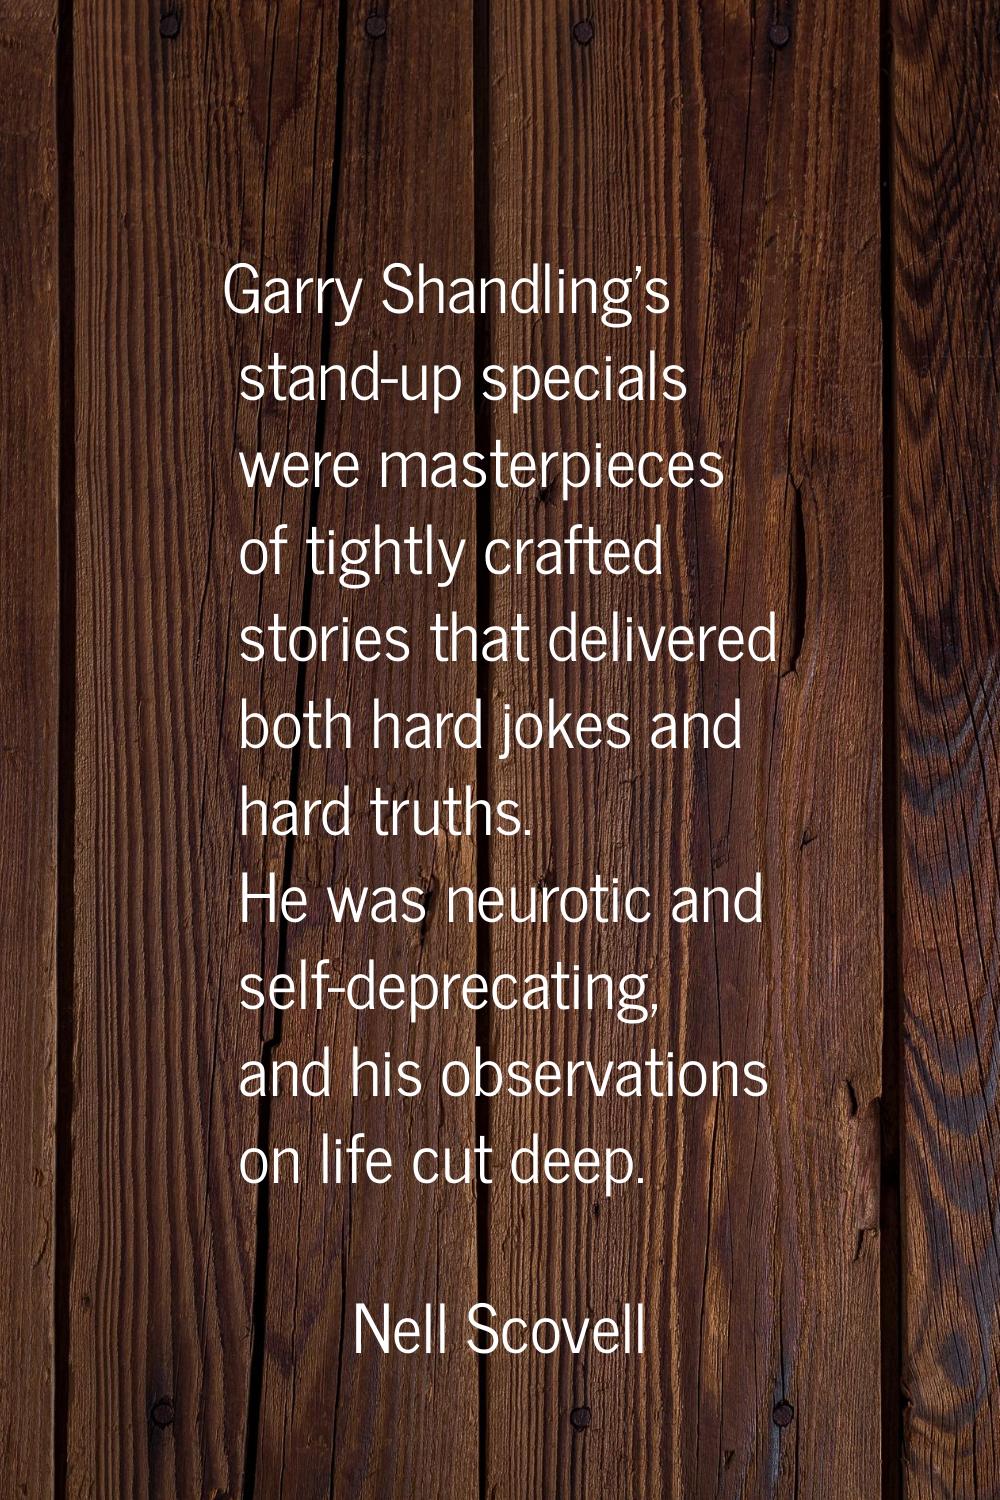 Garry Shandling's stand-up specials were masterpieces of tightly crafted stories that delivered bot